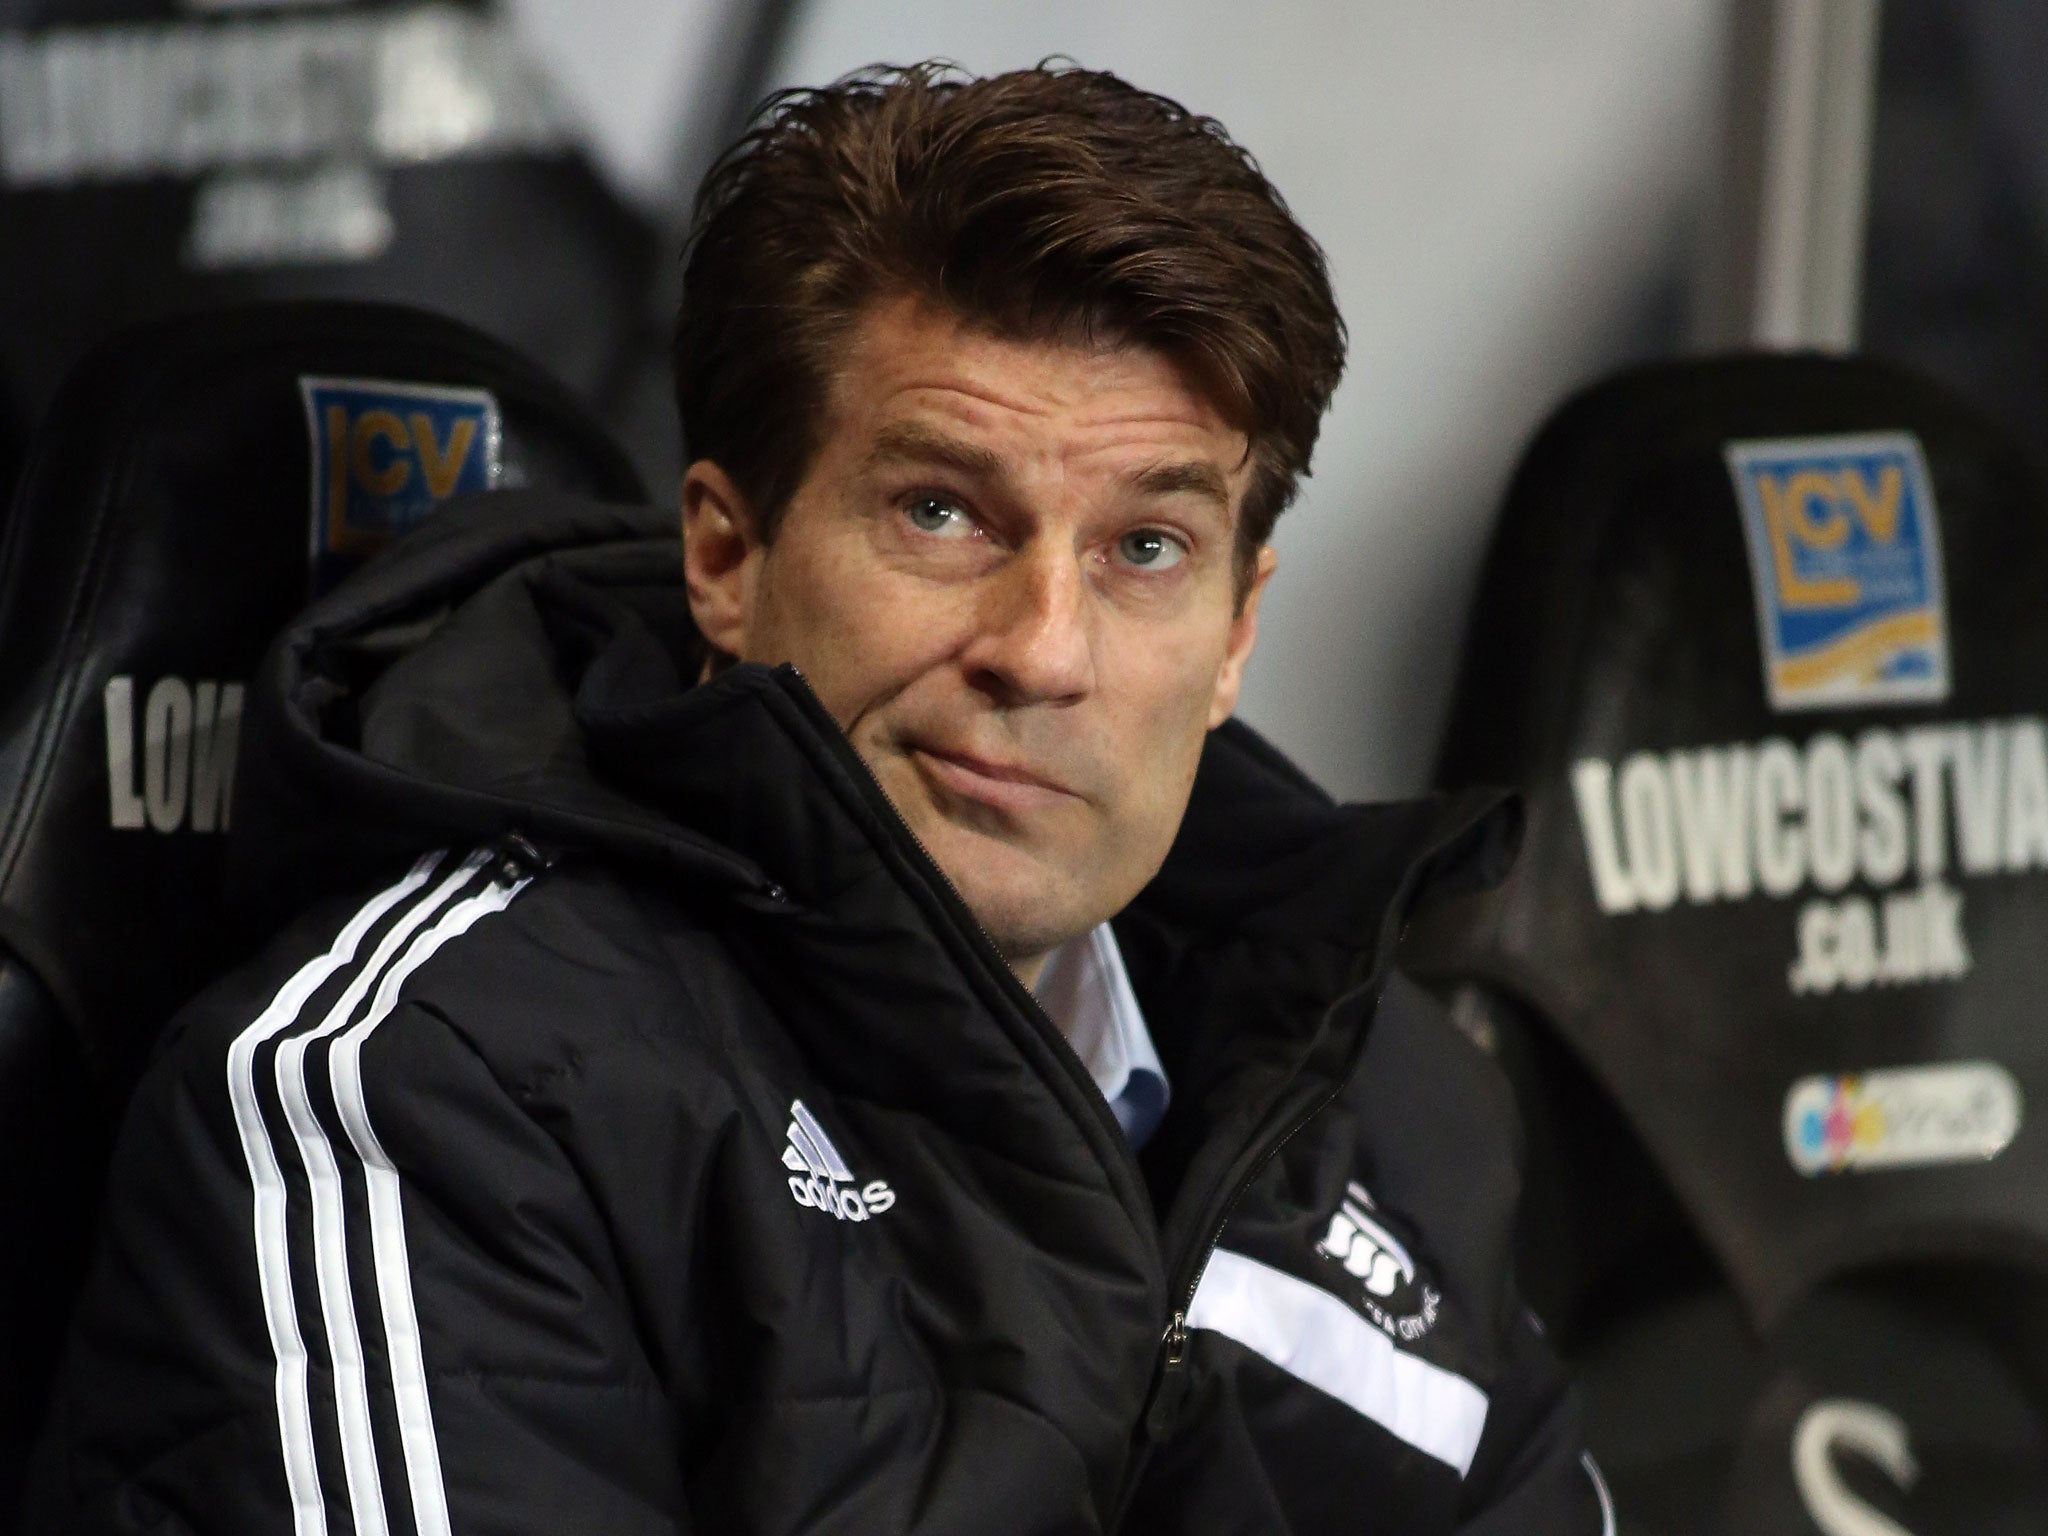 Swansea manager Michael Laudrup is among the favourites to replace Andre Villas-Boas at Tottenham